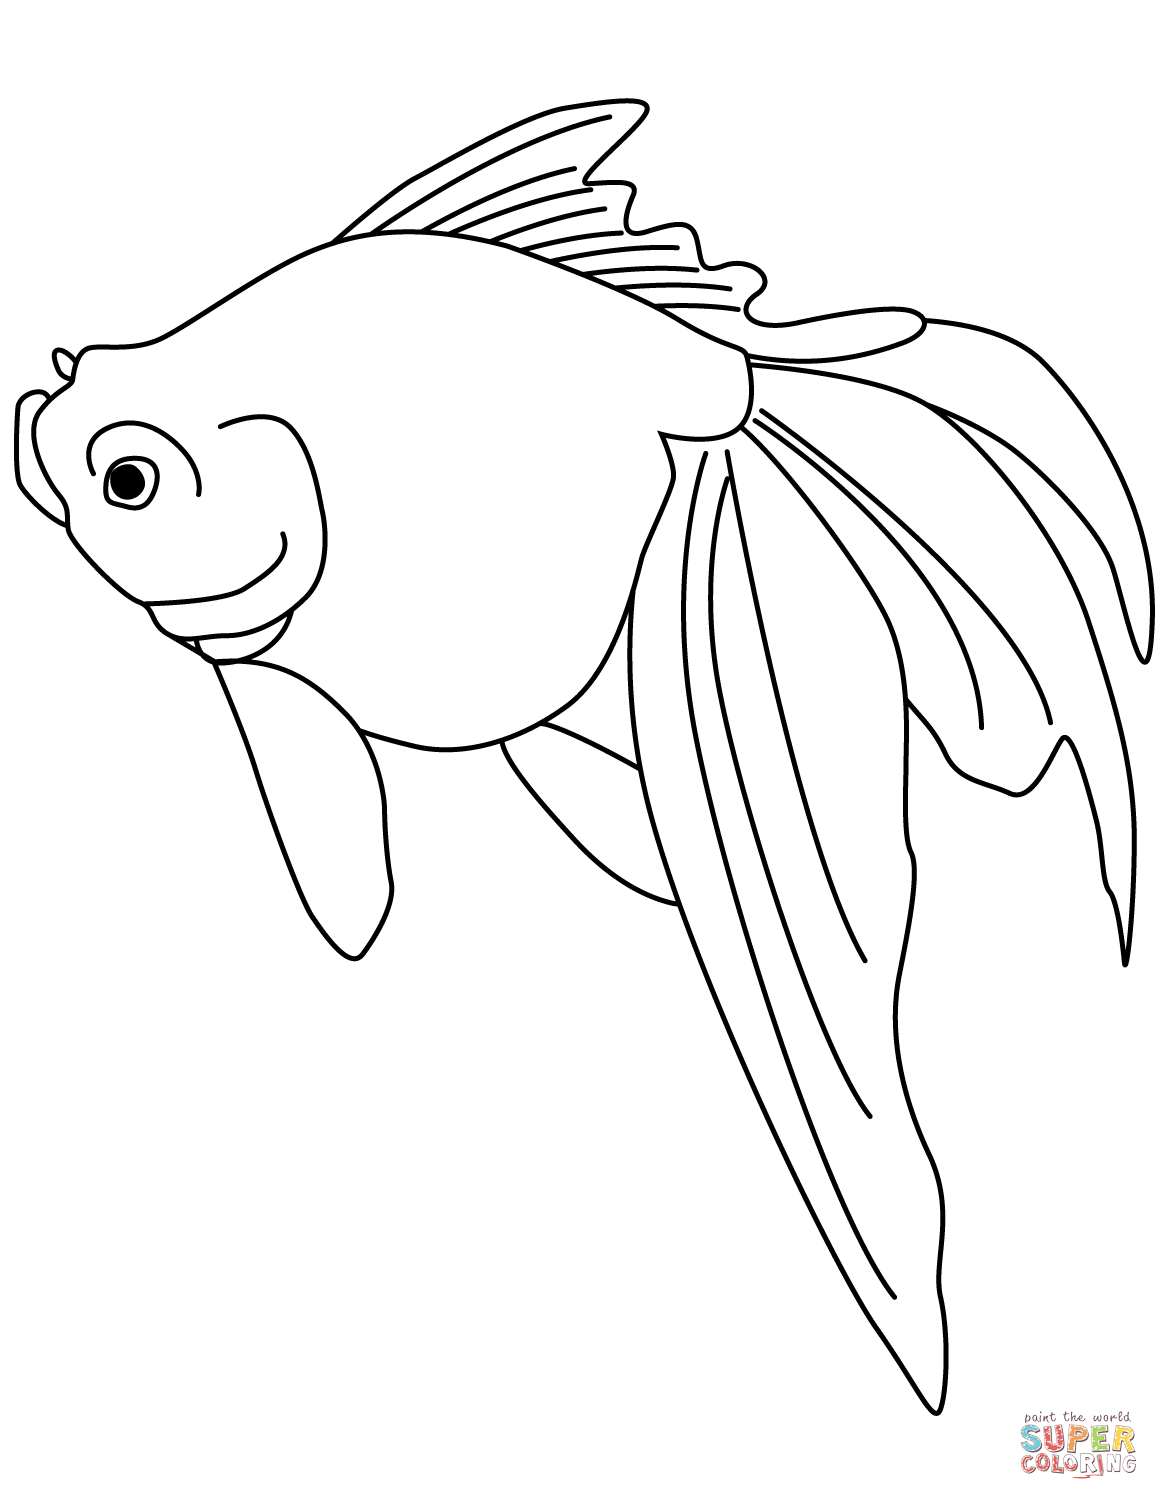 Easy Simple Goldfish Coloring Pages